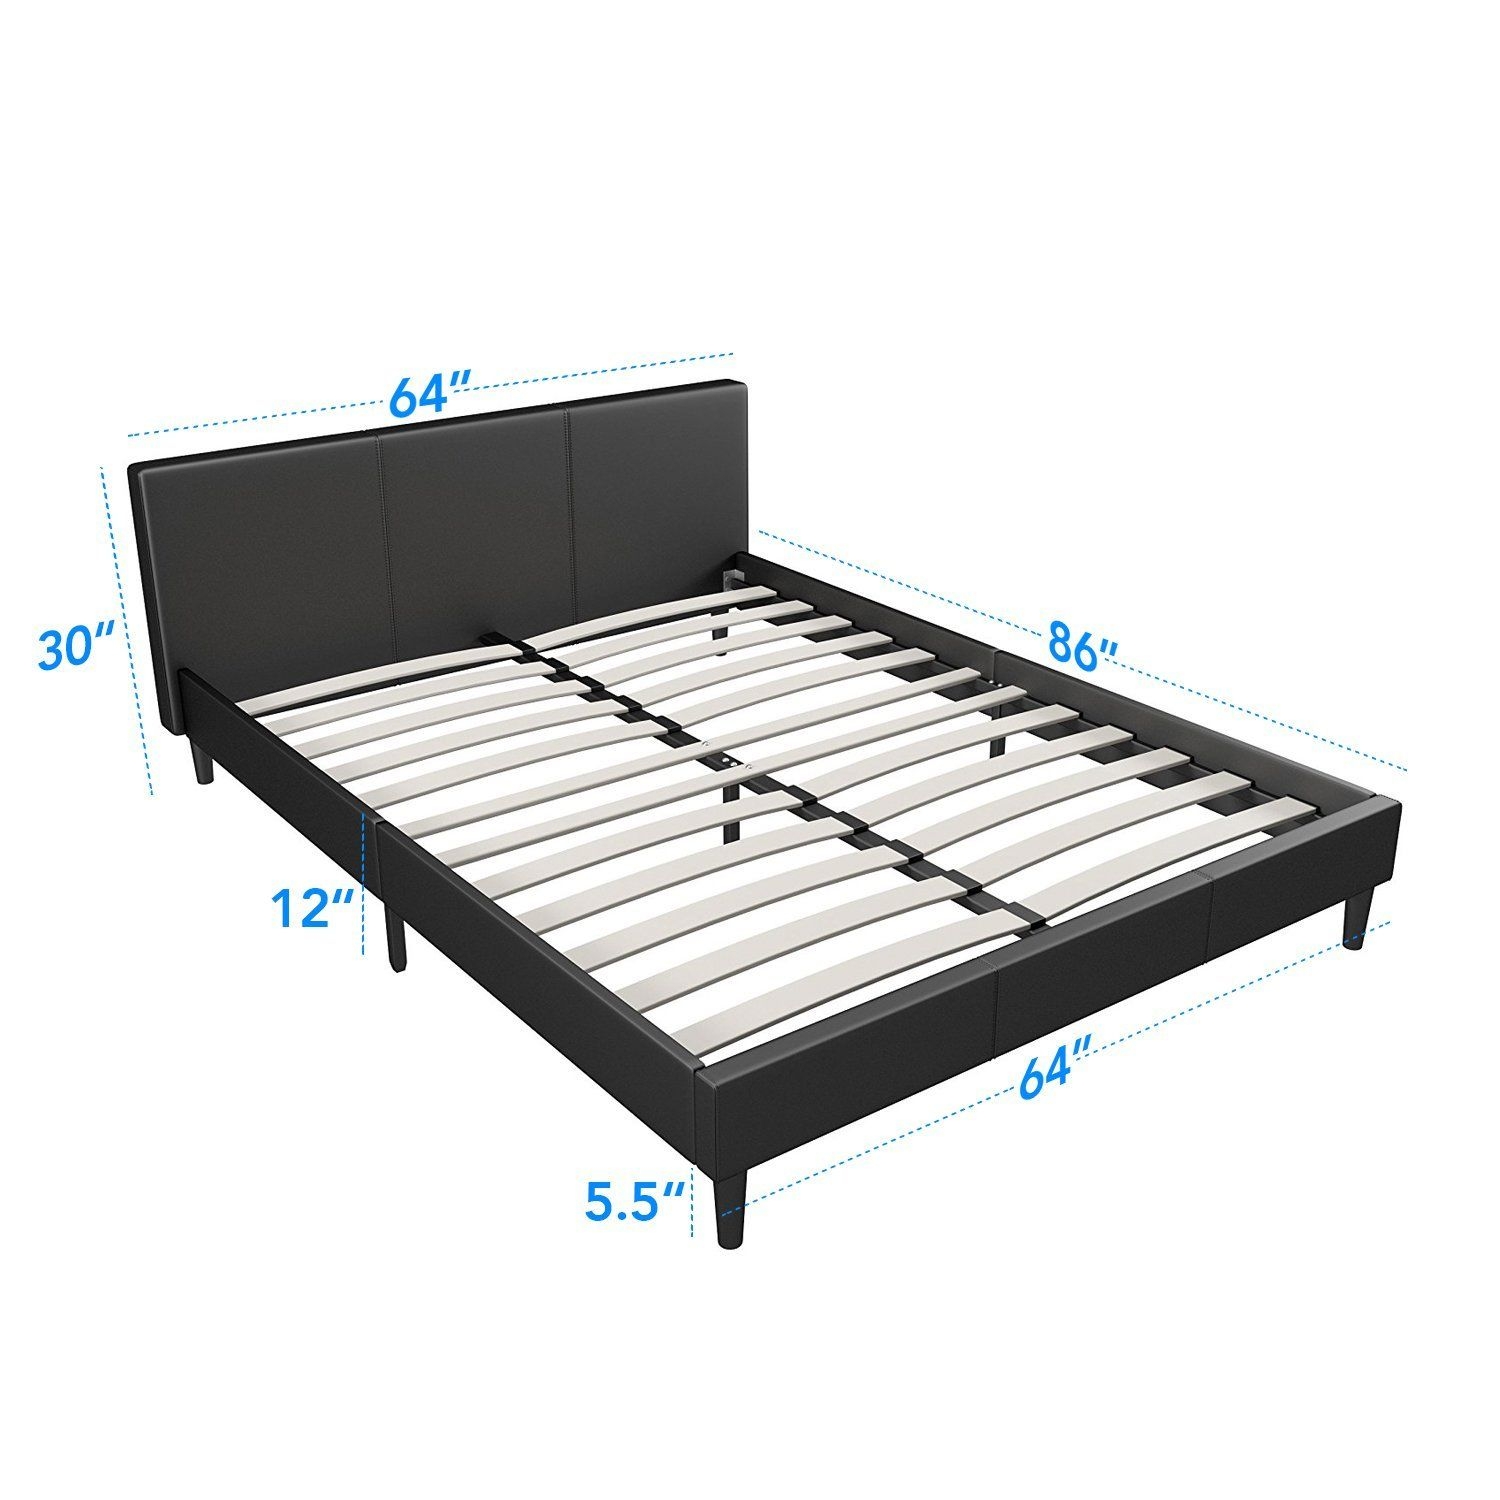 Low Profile Queen Bed Frames Visualhunt, Ultra Low Bed Frame Queen